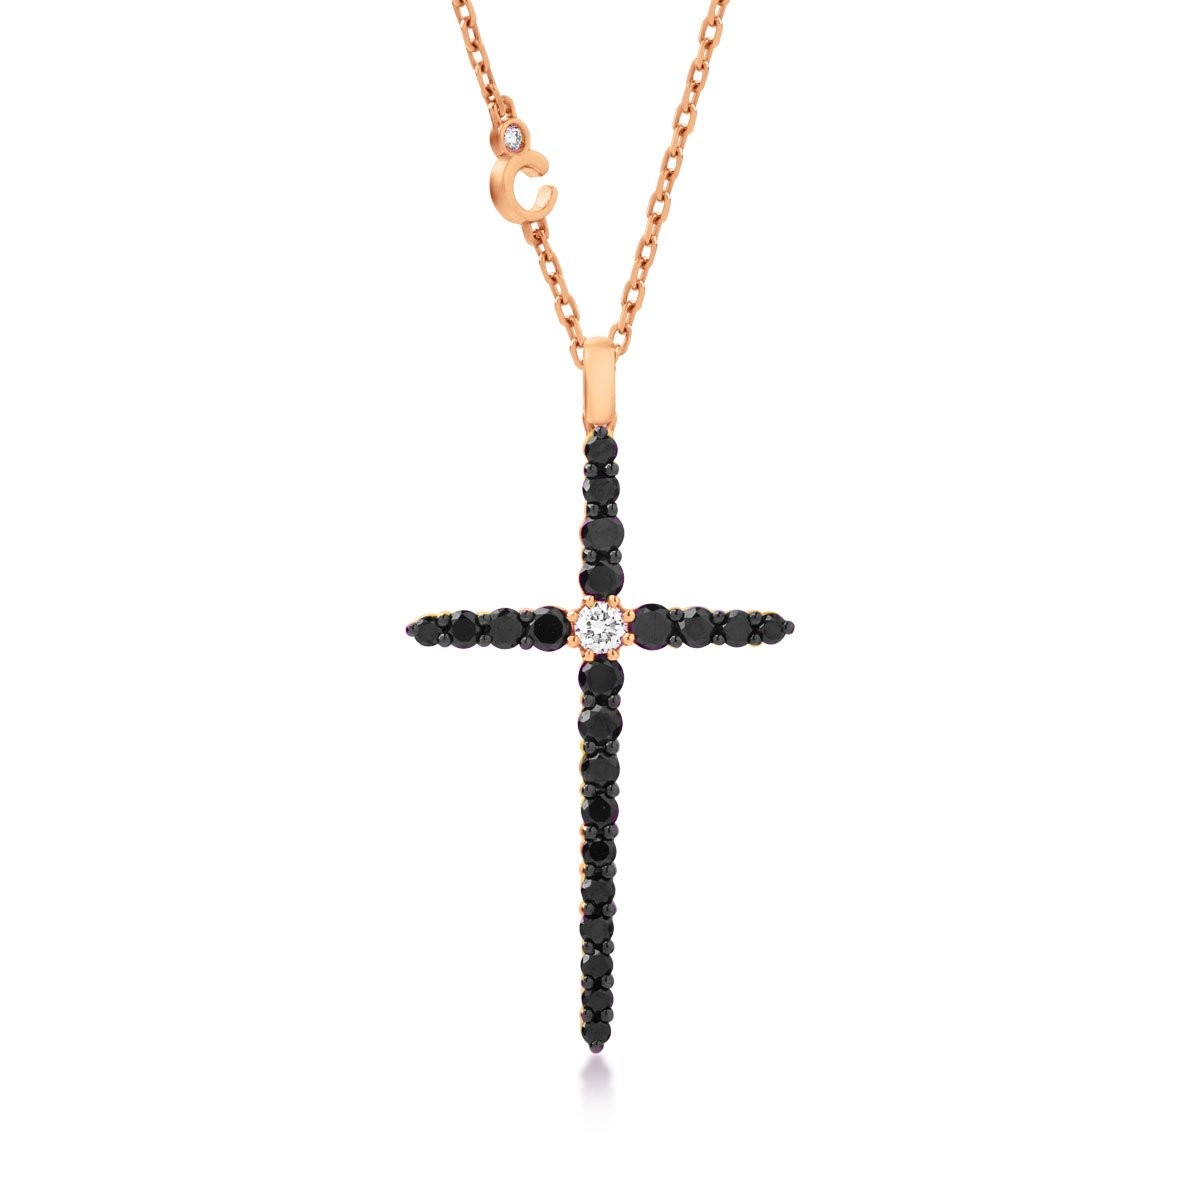 18K rose gold cross pendant necklace with 0.11ct clear diamonds and 0.94ct black diamonds